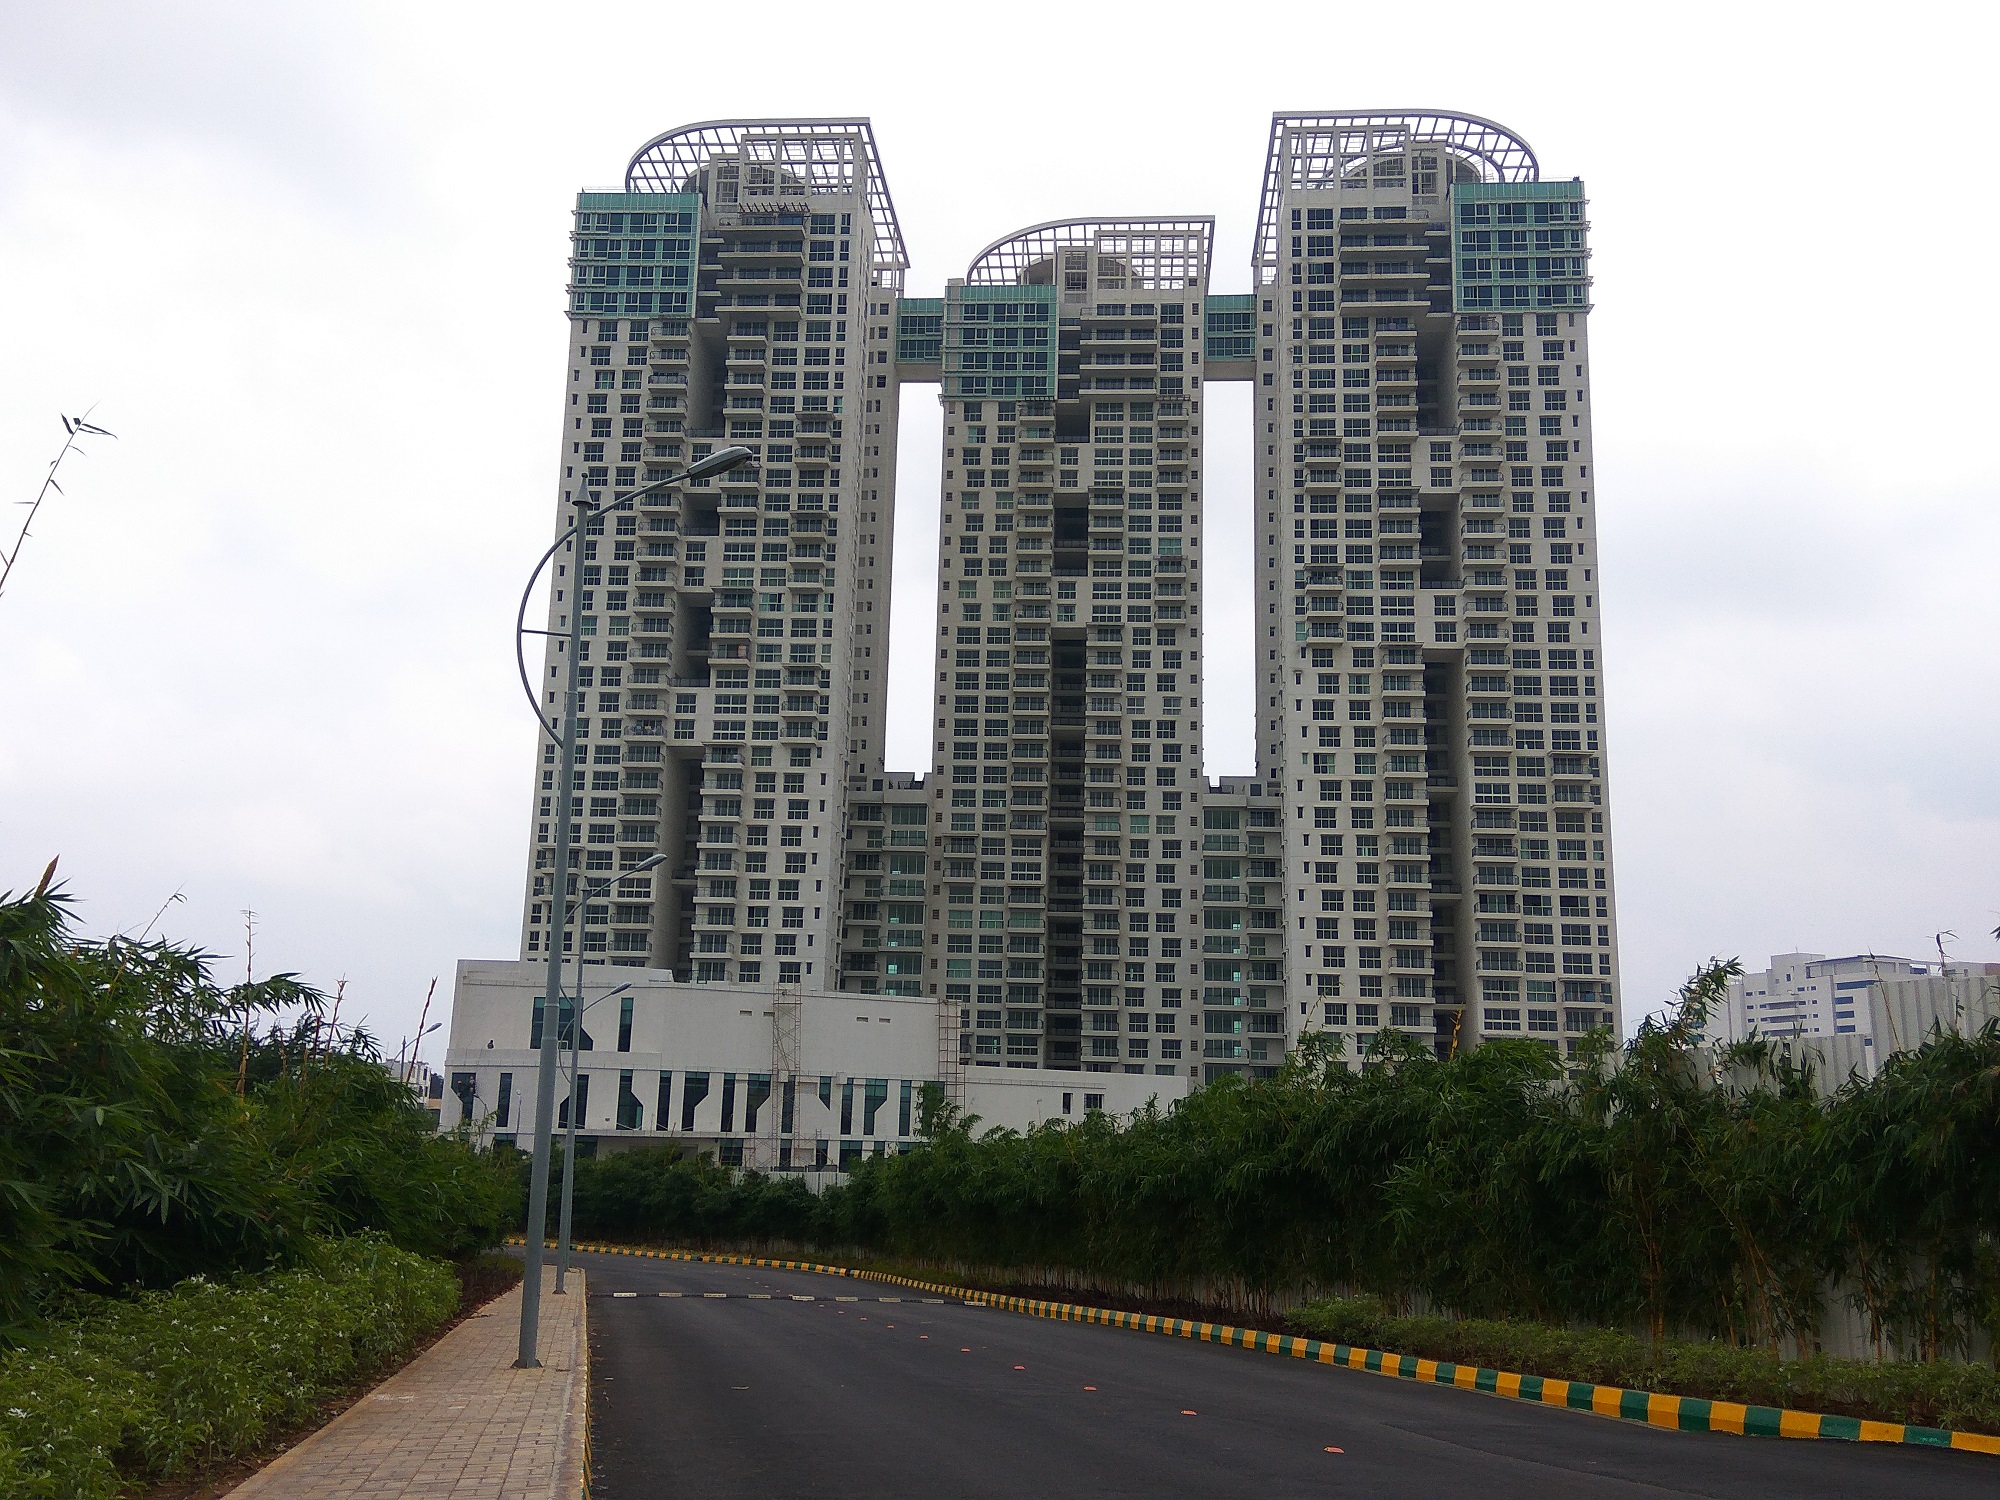 Hebbal: Beautiful 3 bedroom furnished flat for sale